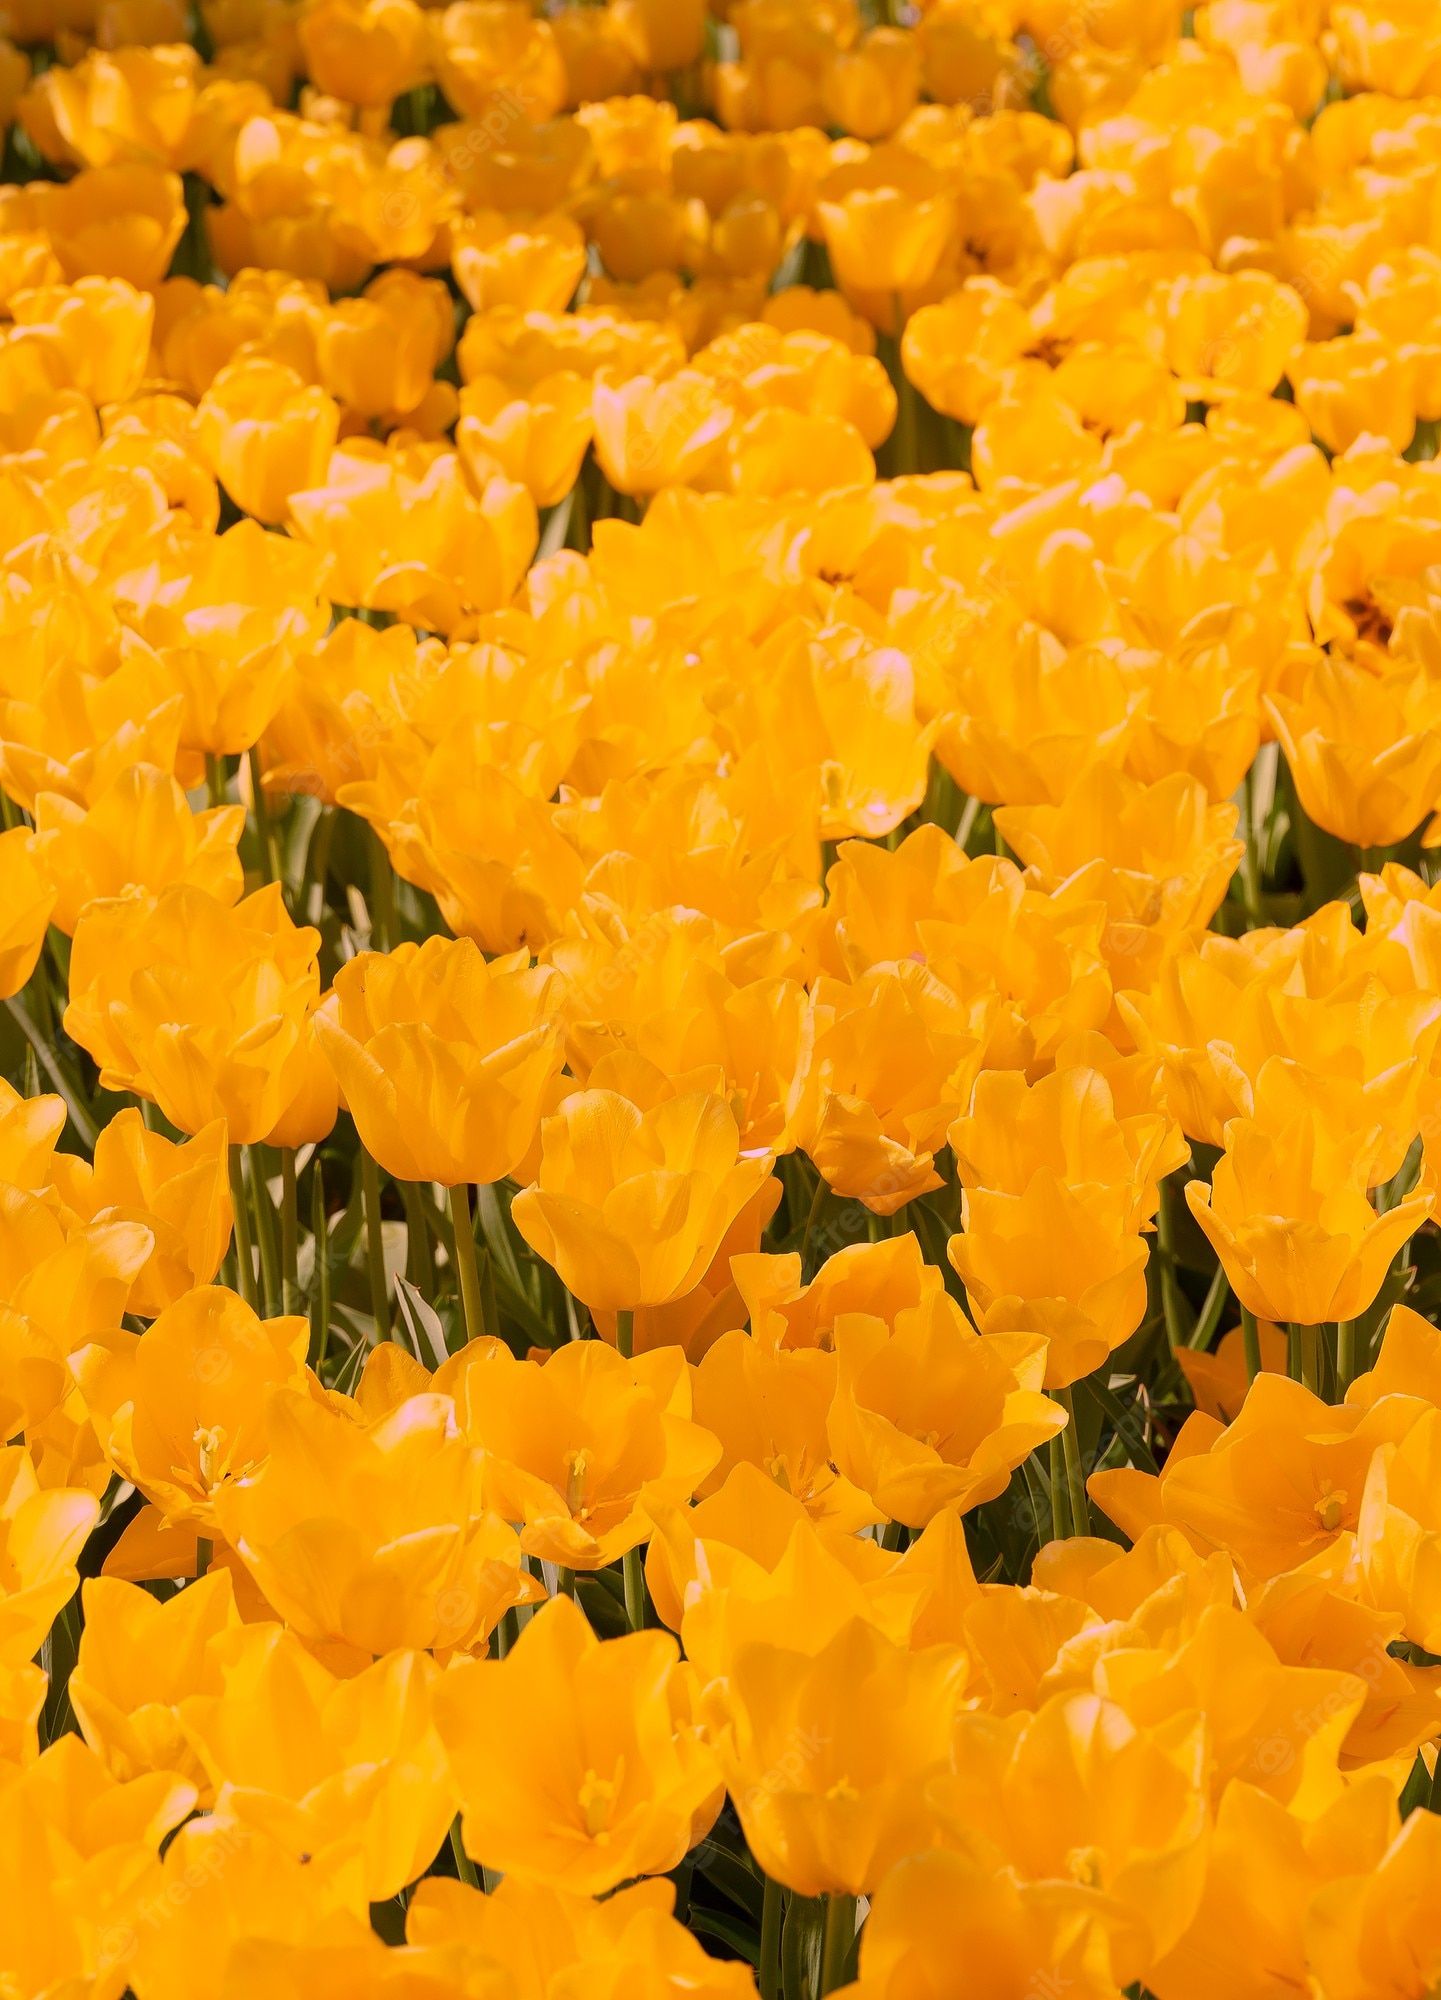 A close up of some yellow flowers - Tulip